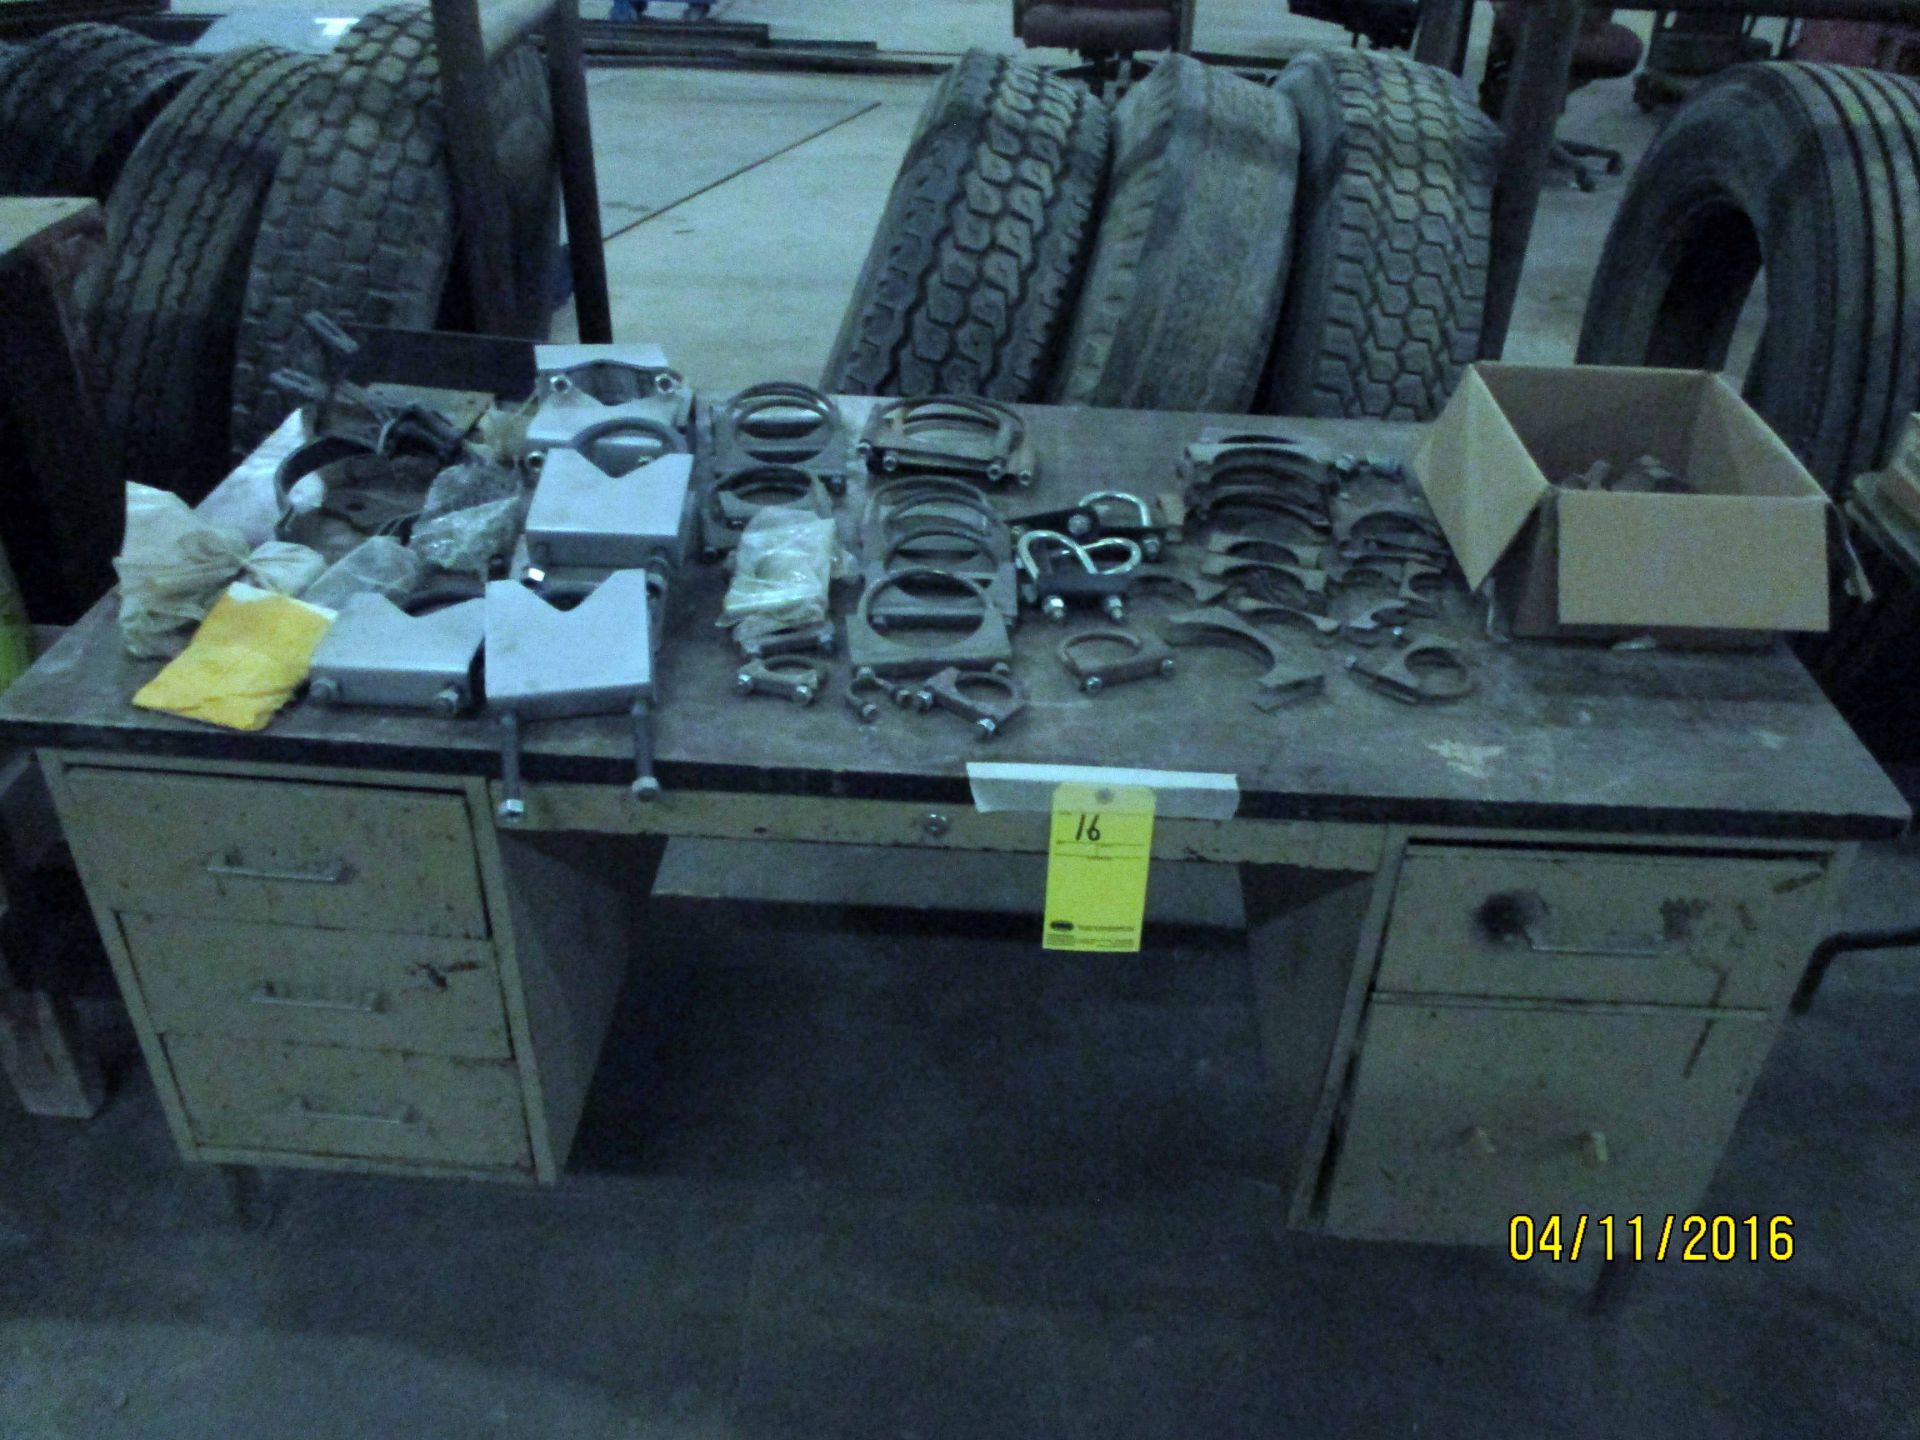 LOT CONSISTING OF: muffler clamps & 5th wheel jaws (on one desk)